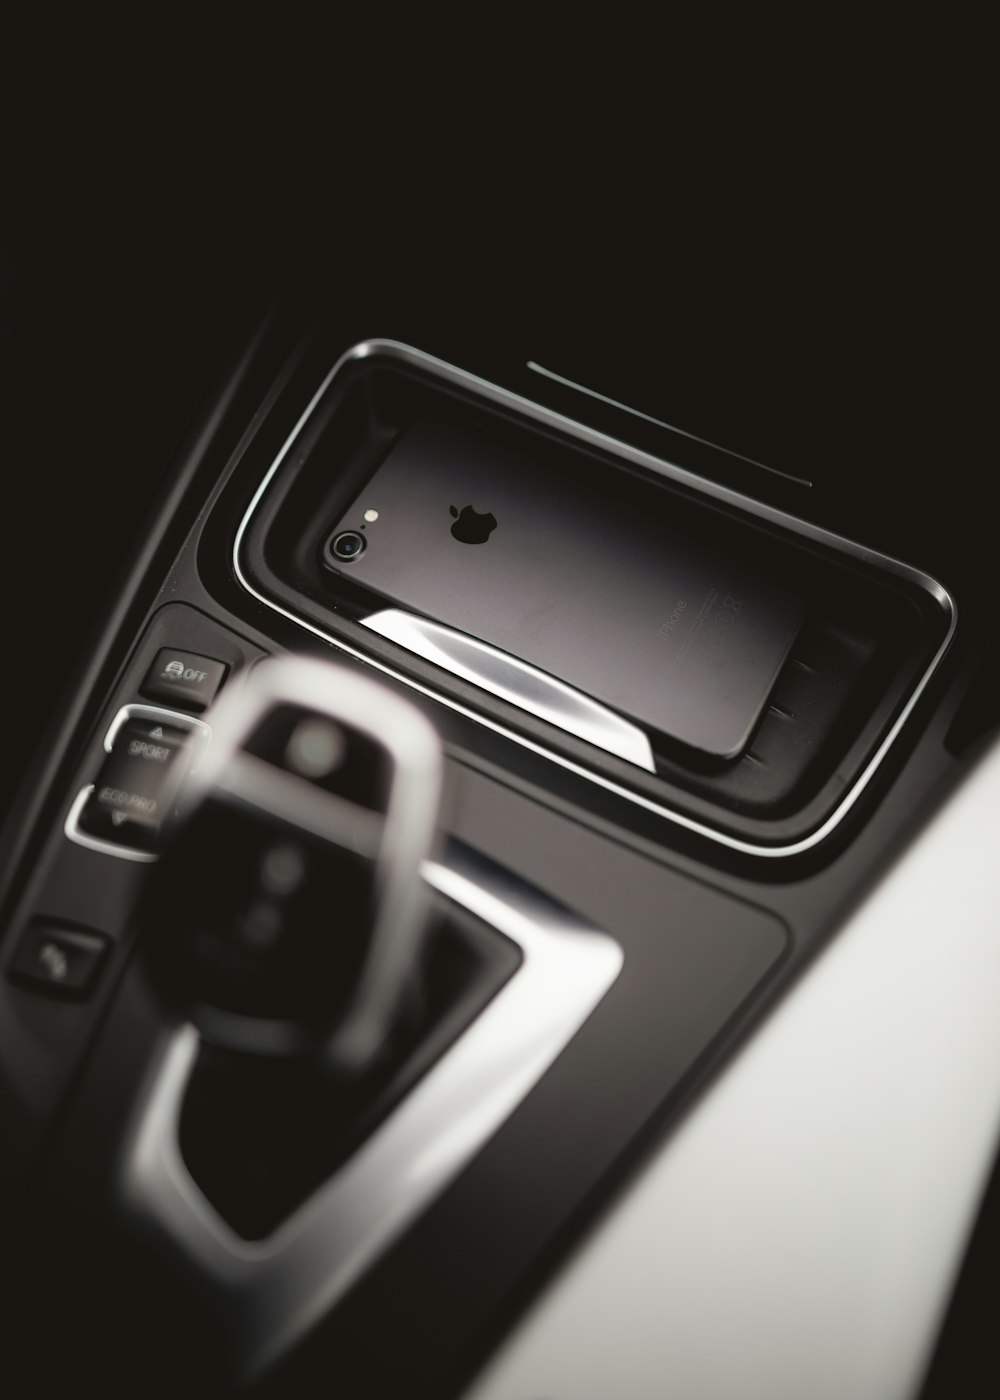 space gray iPhone 7 beside gear shift lever